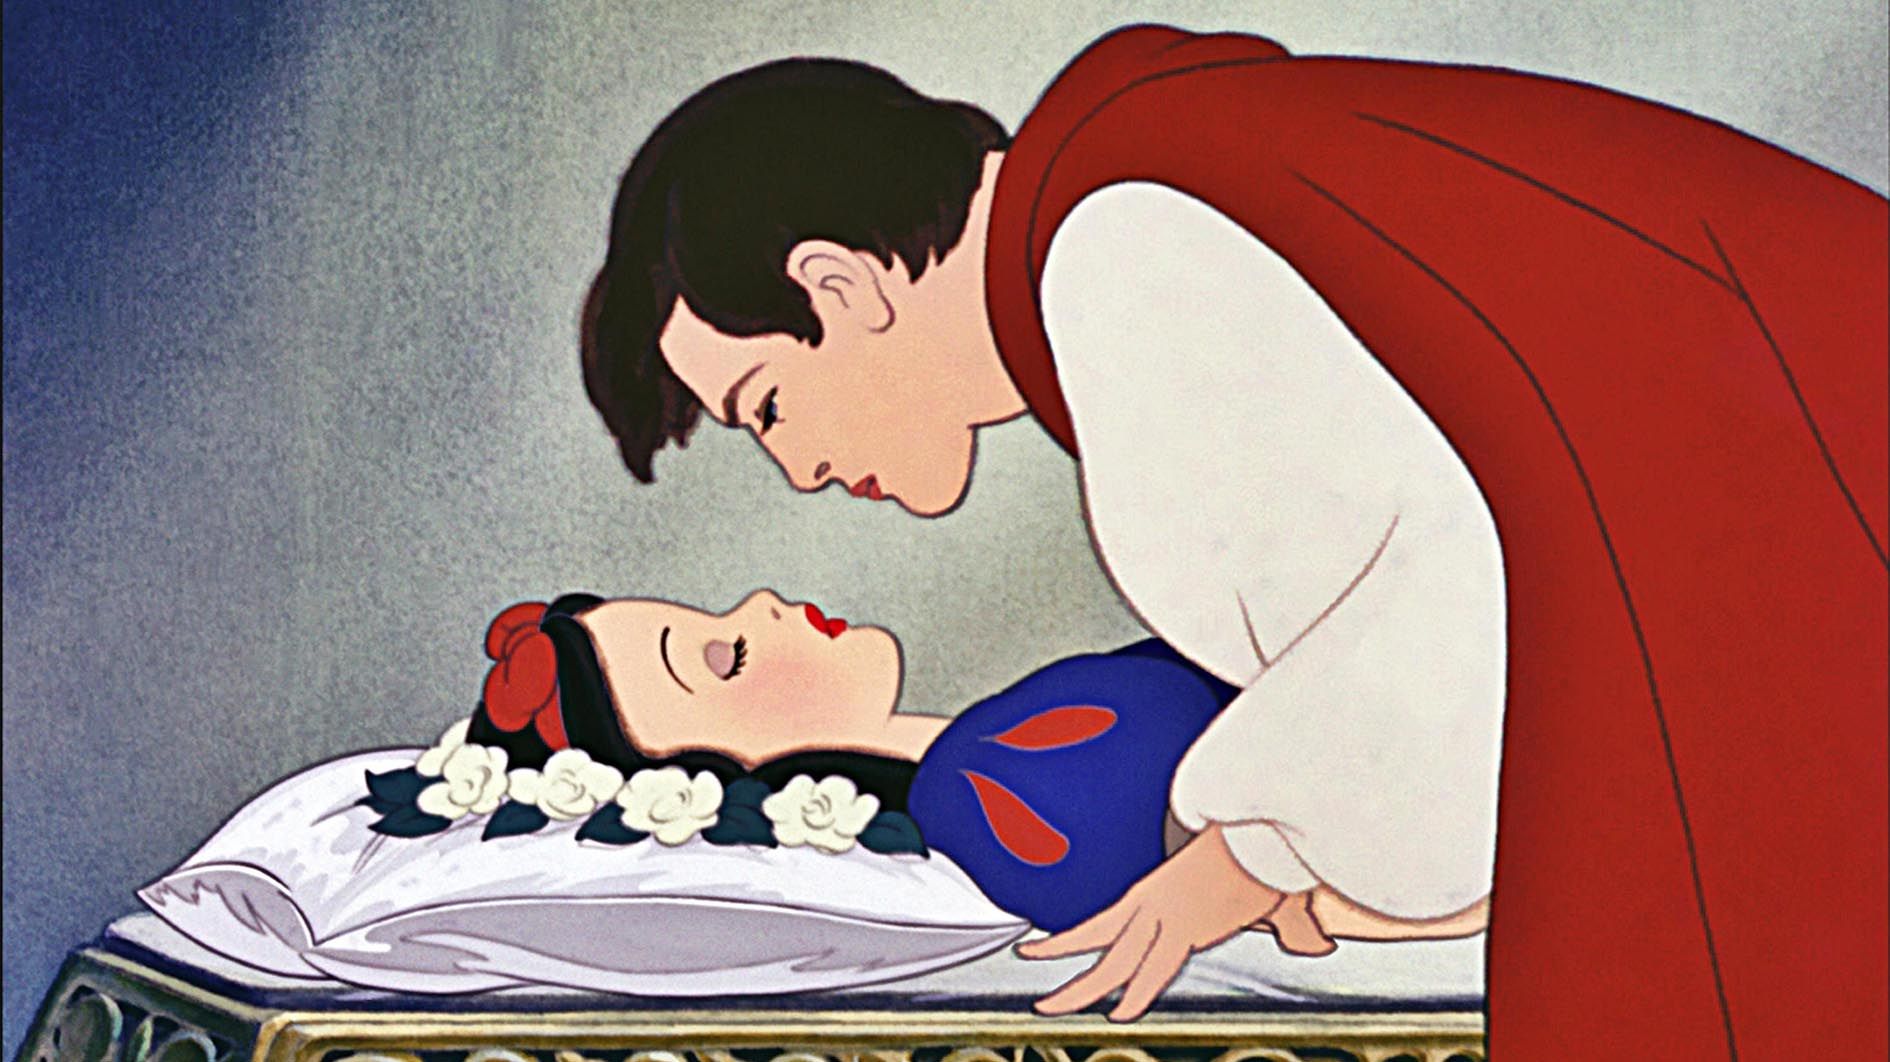 Was Snow White 7 or 14?